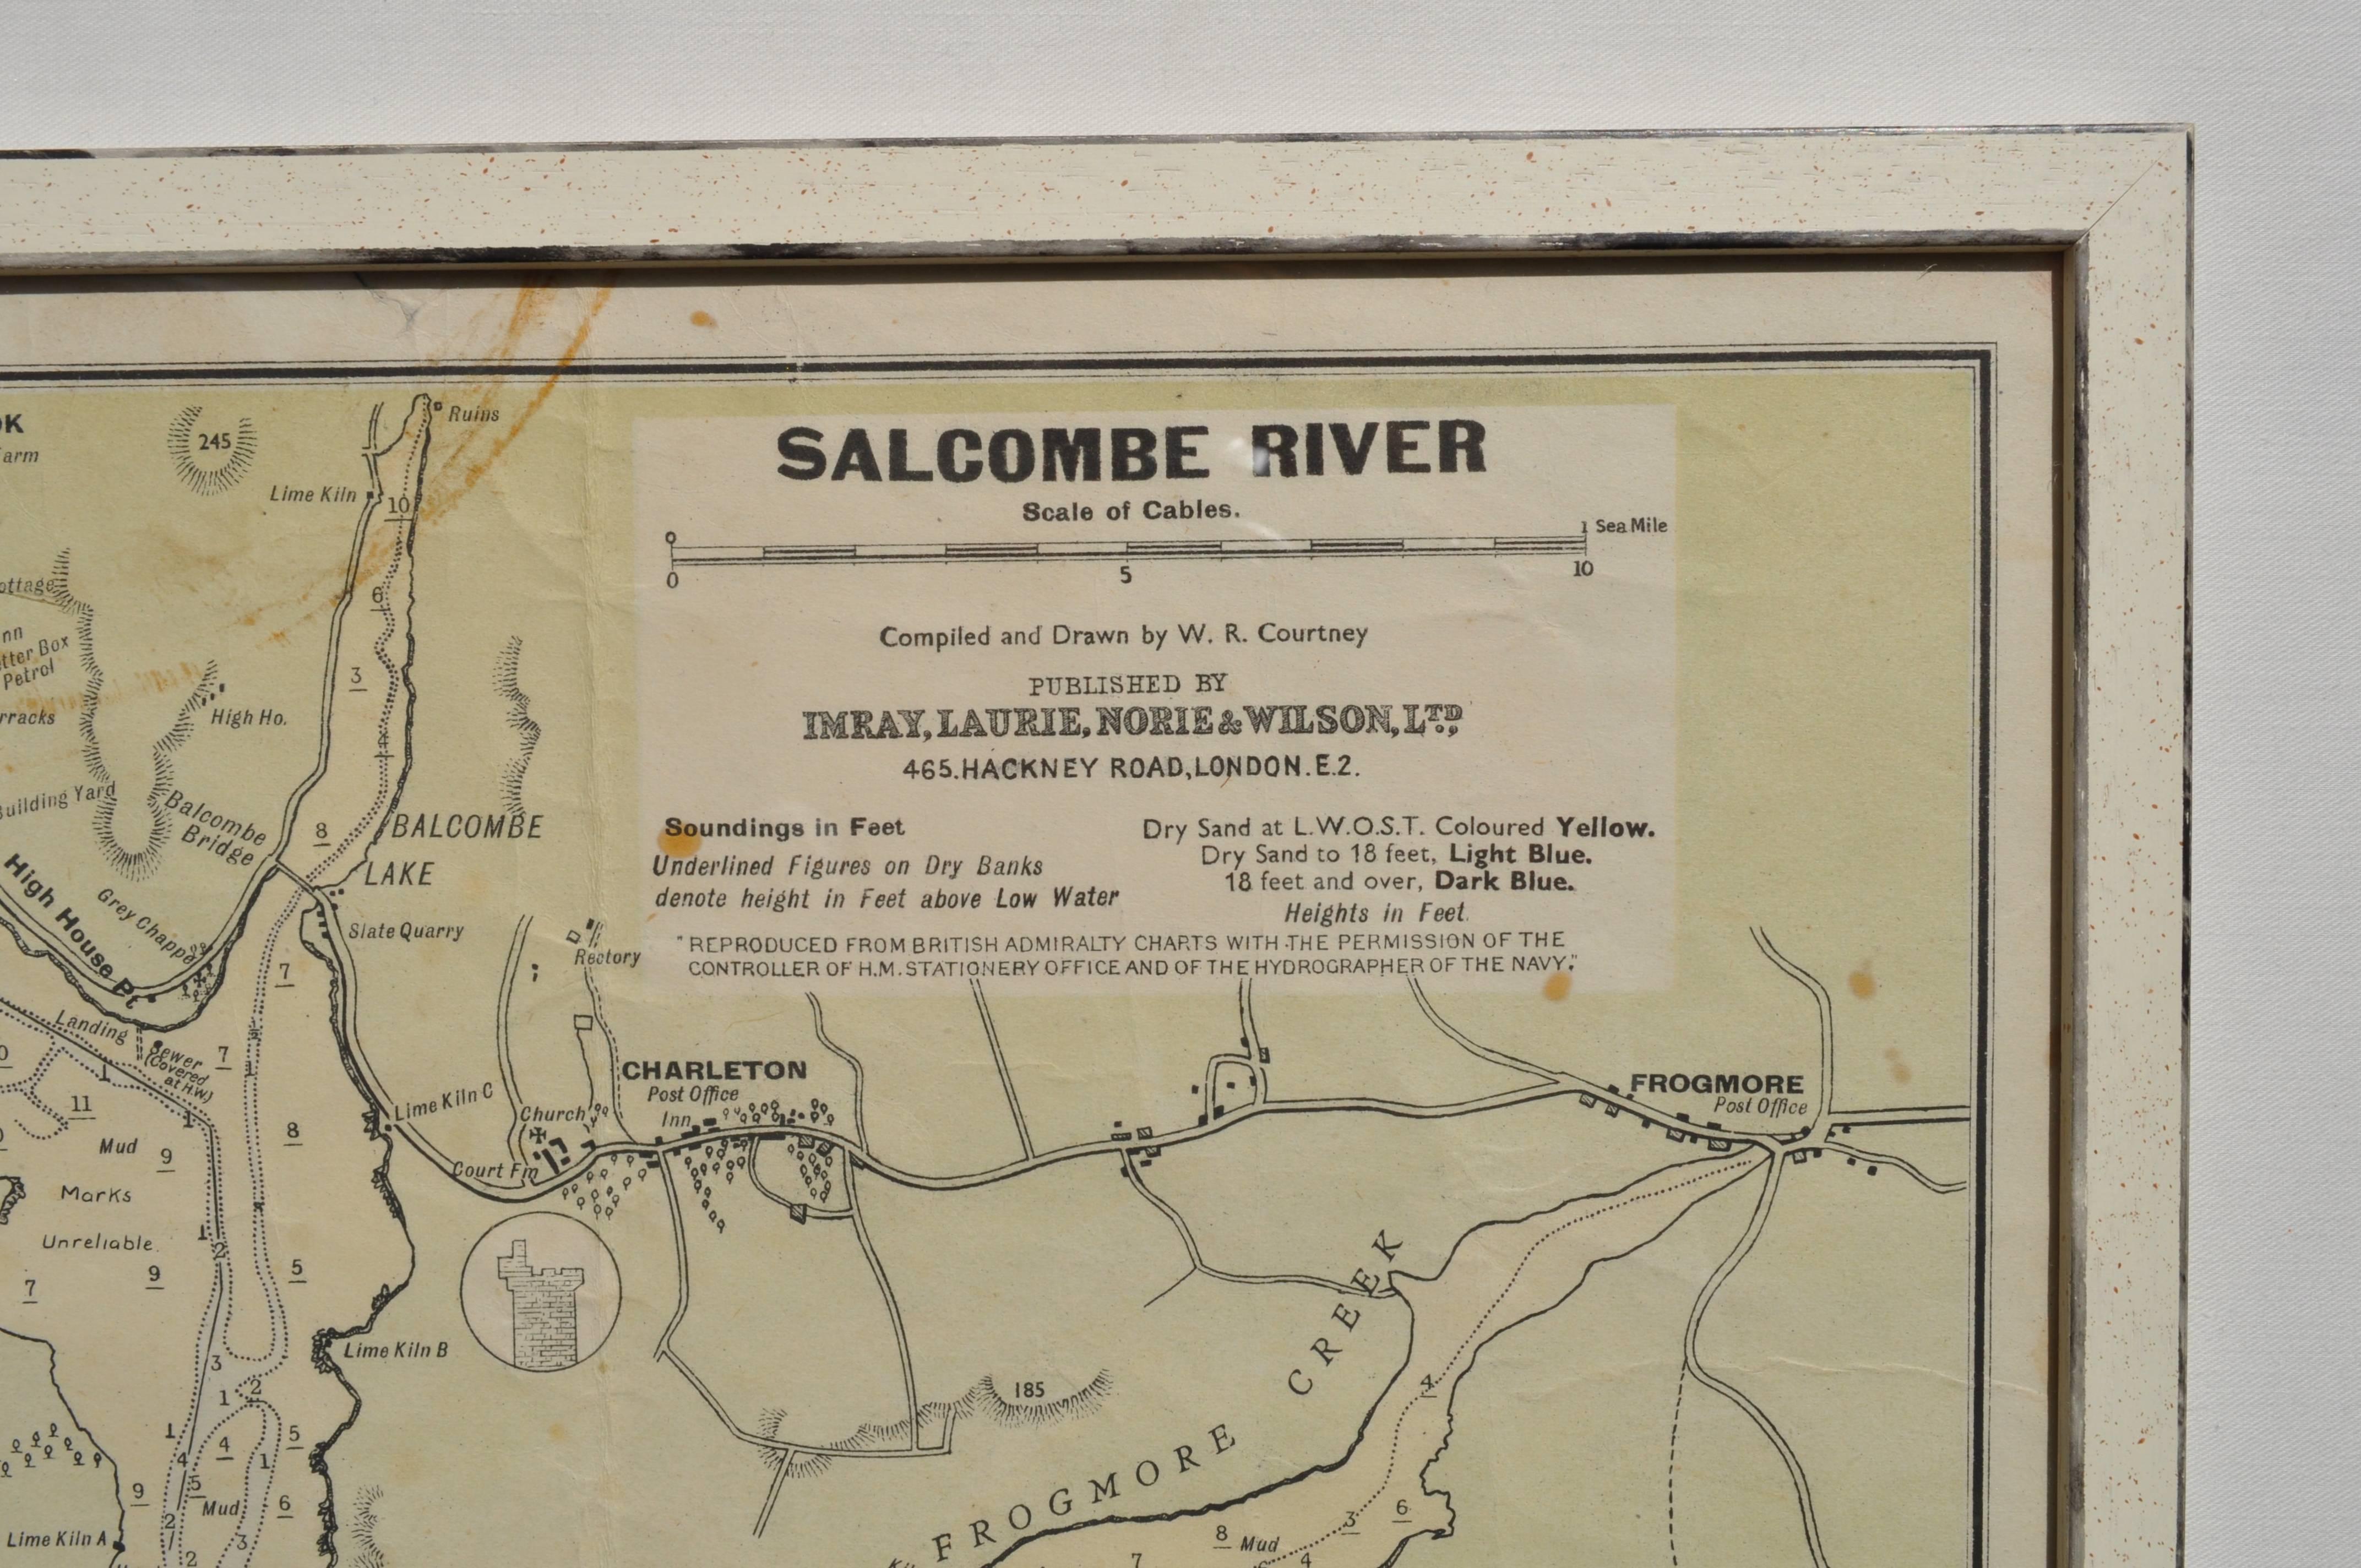 A beautiful and rare 1946 framed, colored map of Salcombe River, South Devon. This was compiled and drawn by W.R Courtney and published in London by Imray, Laurie, Noble & Wilson Ltd. It is framed in a cream wooden frame which has a graphite grey